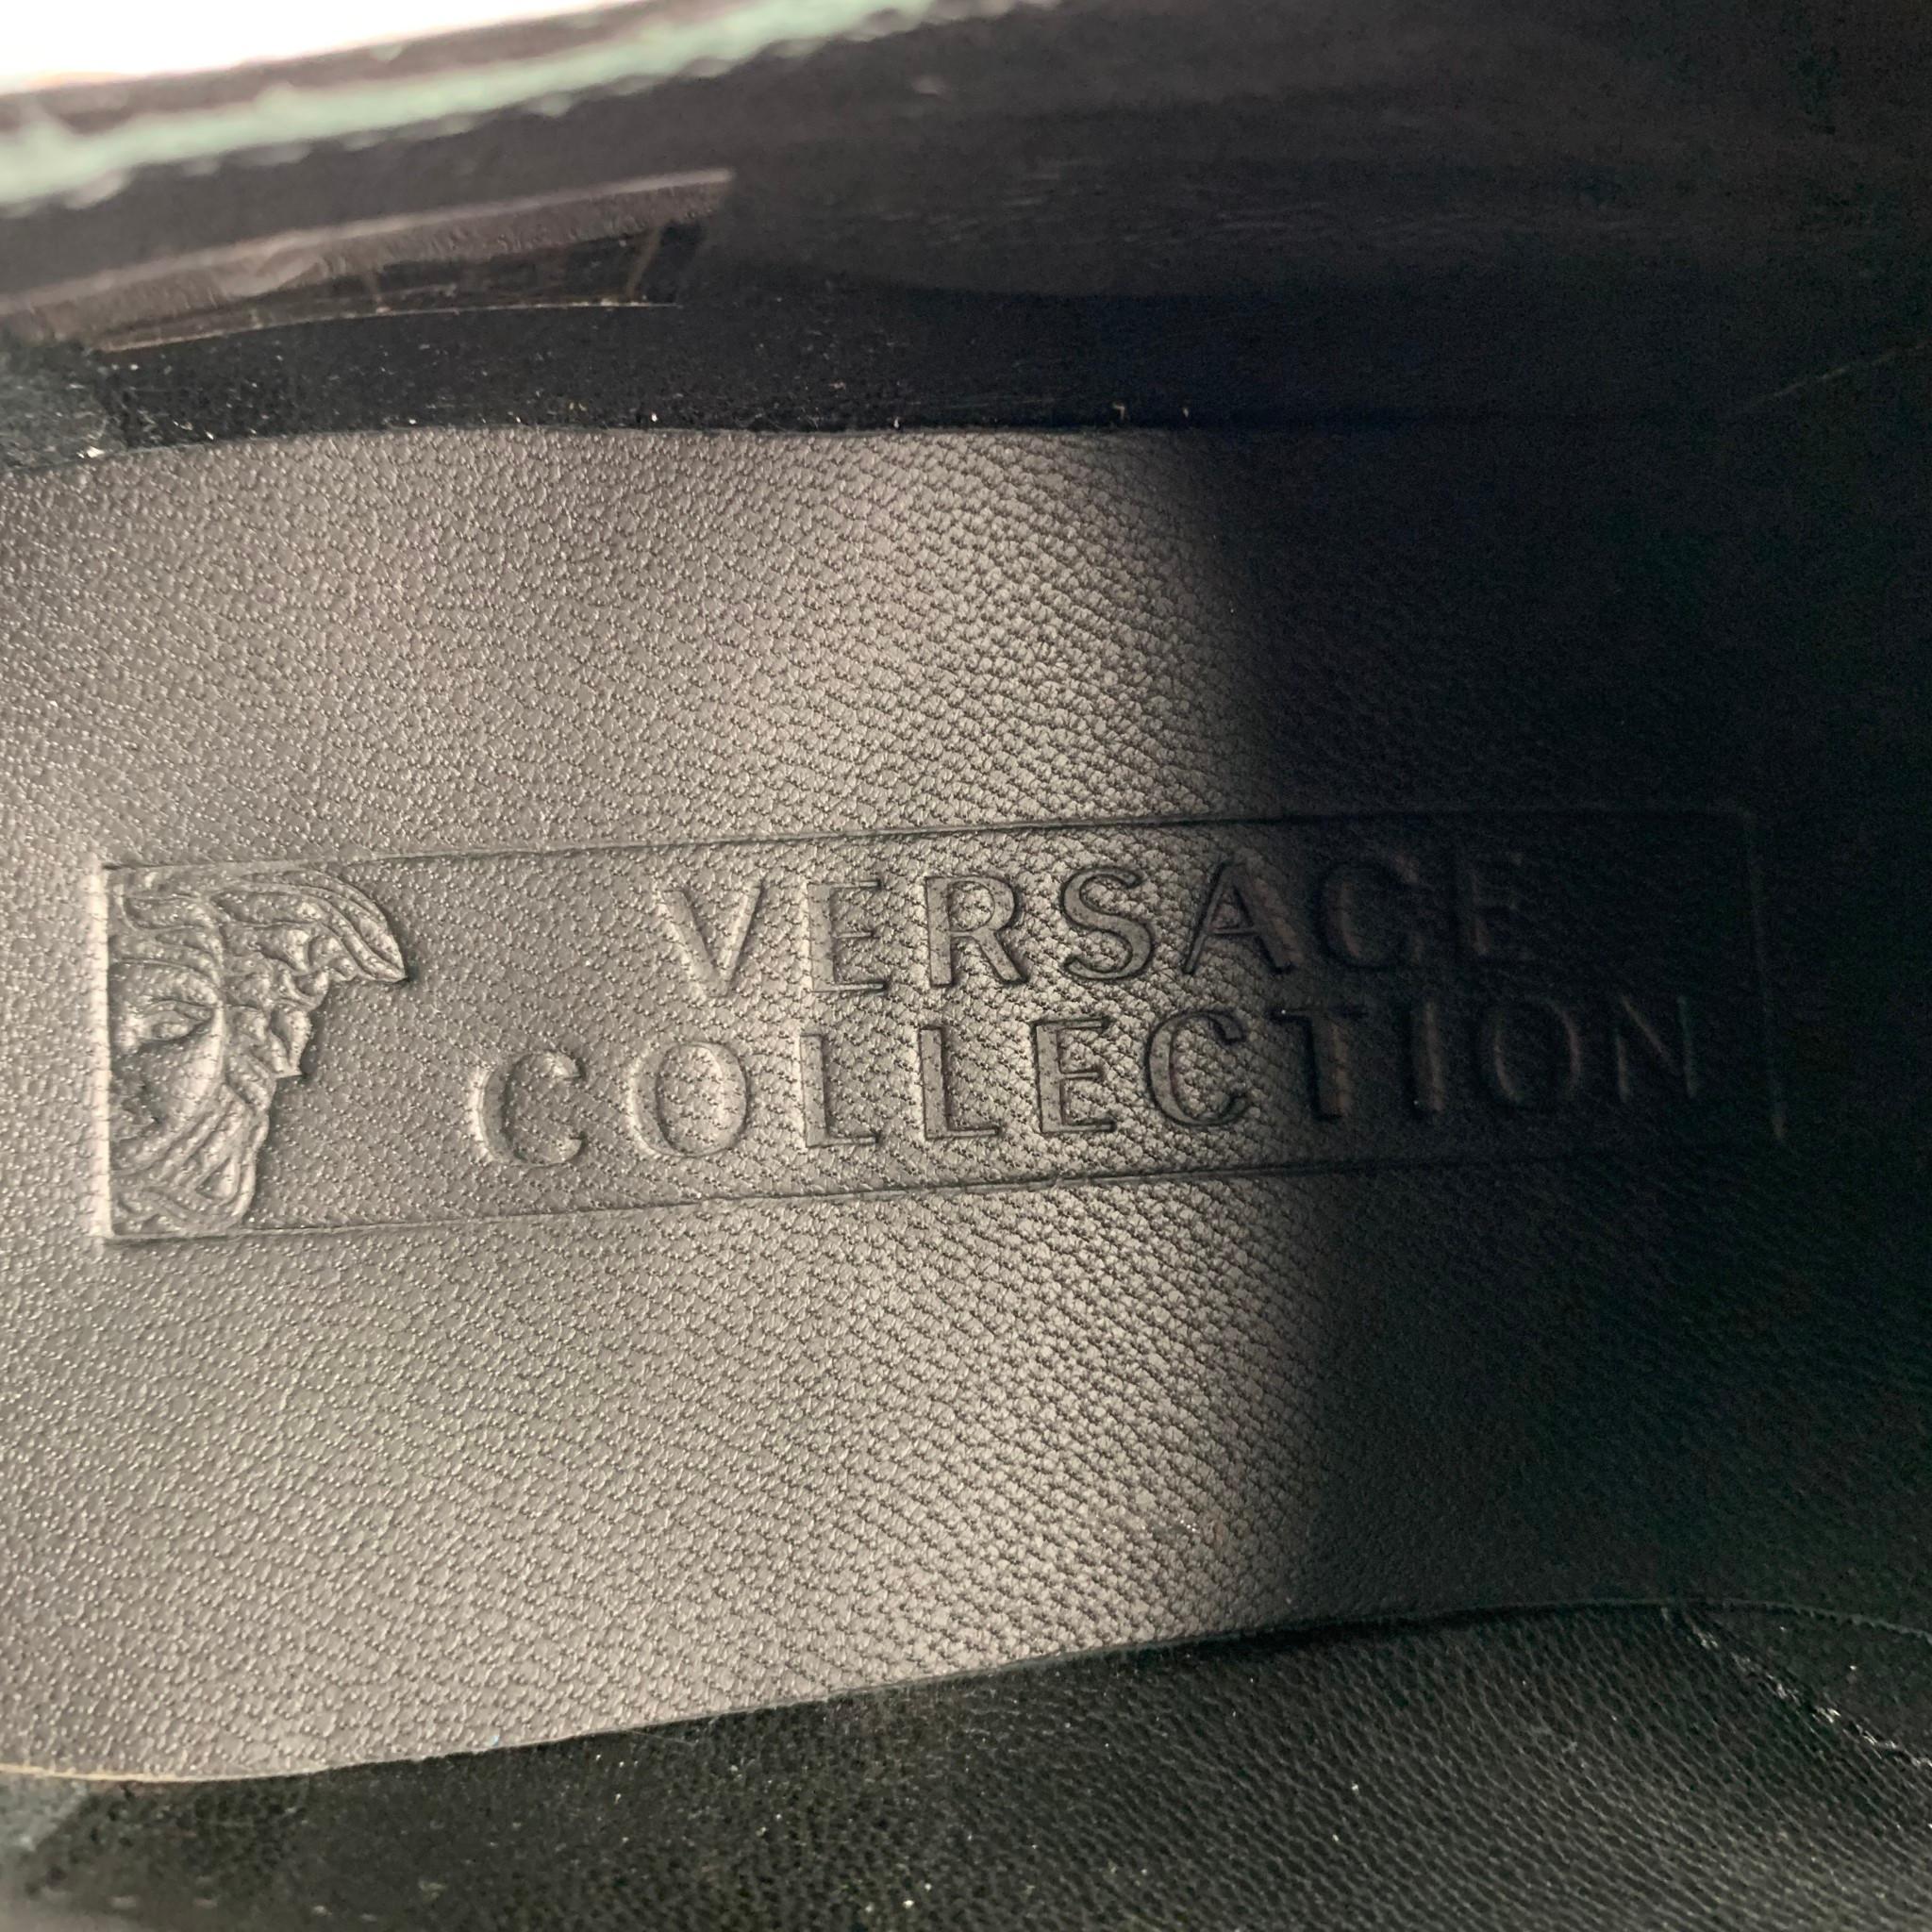 VERSACE COLLECTION Size 7 Black Patent Leather Monk Strap Loafers 2